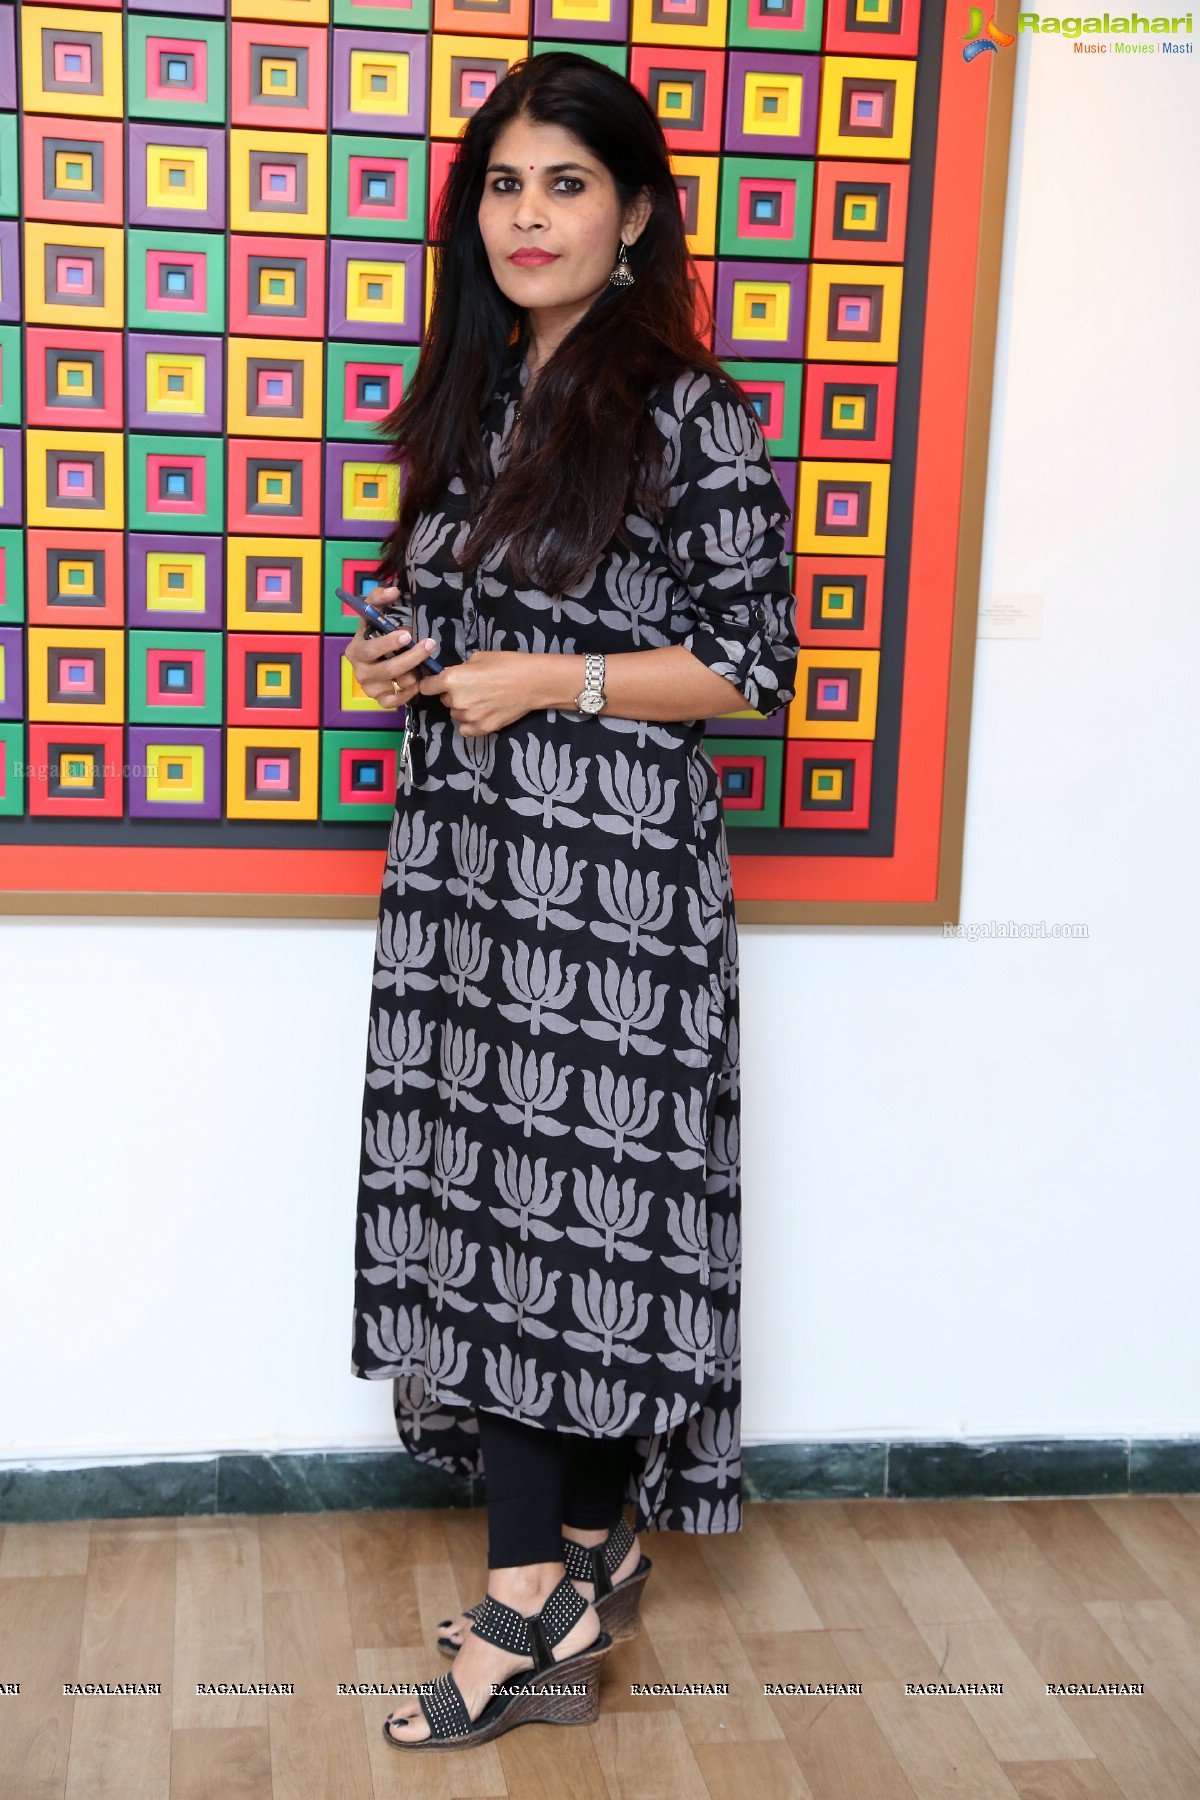 Memory Weave of Pixels and Patterns at Shrishti Art Gallery, Jubilee Hills, Hyderabad